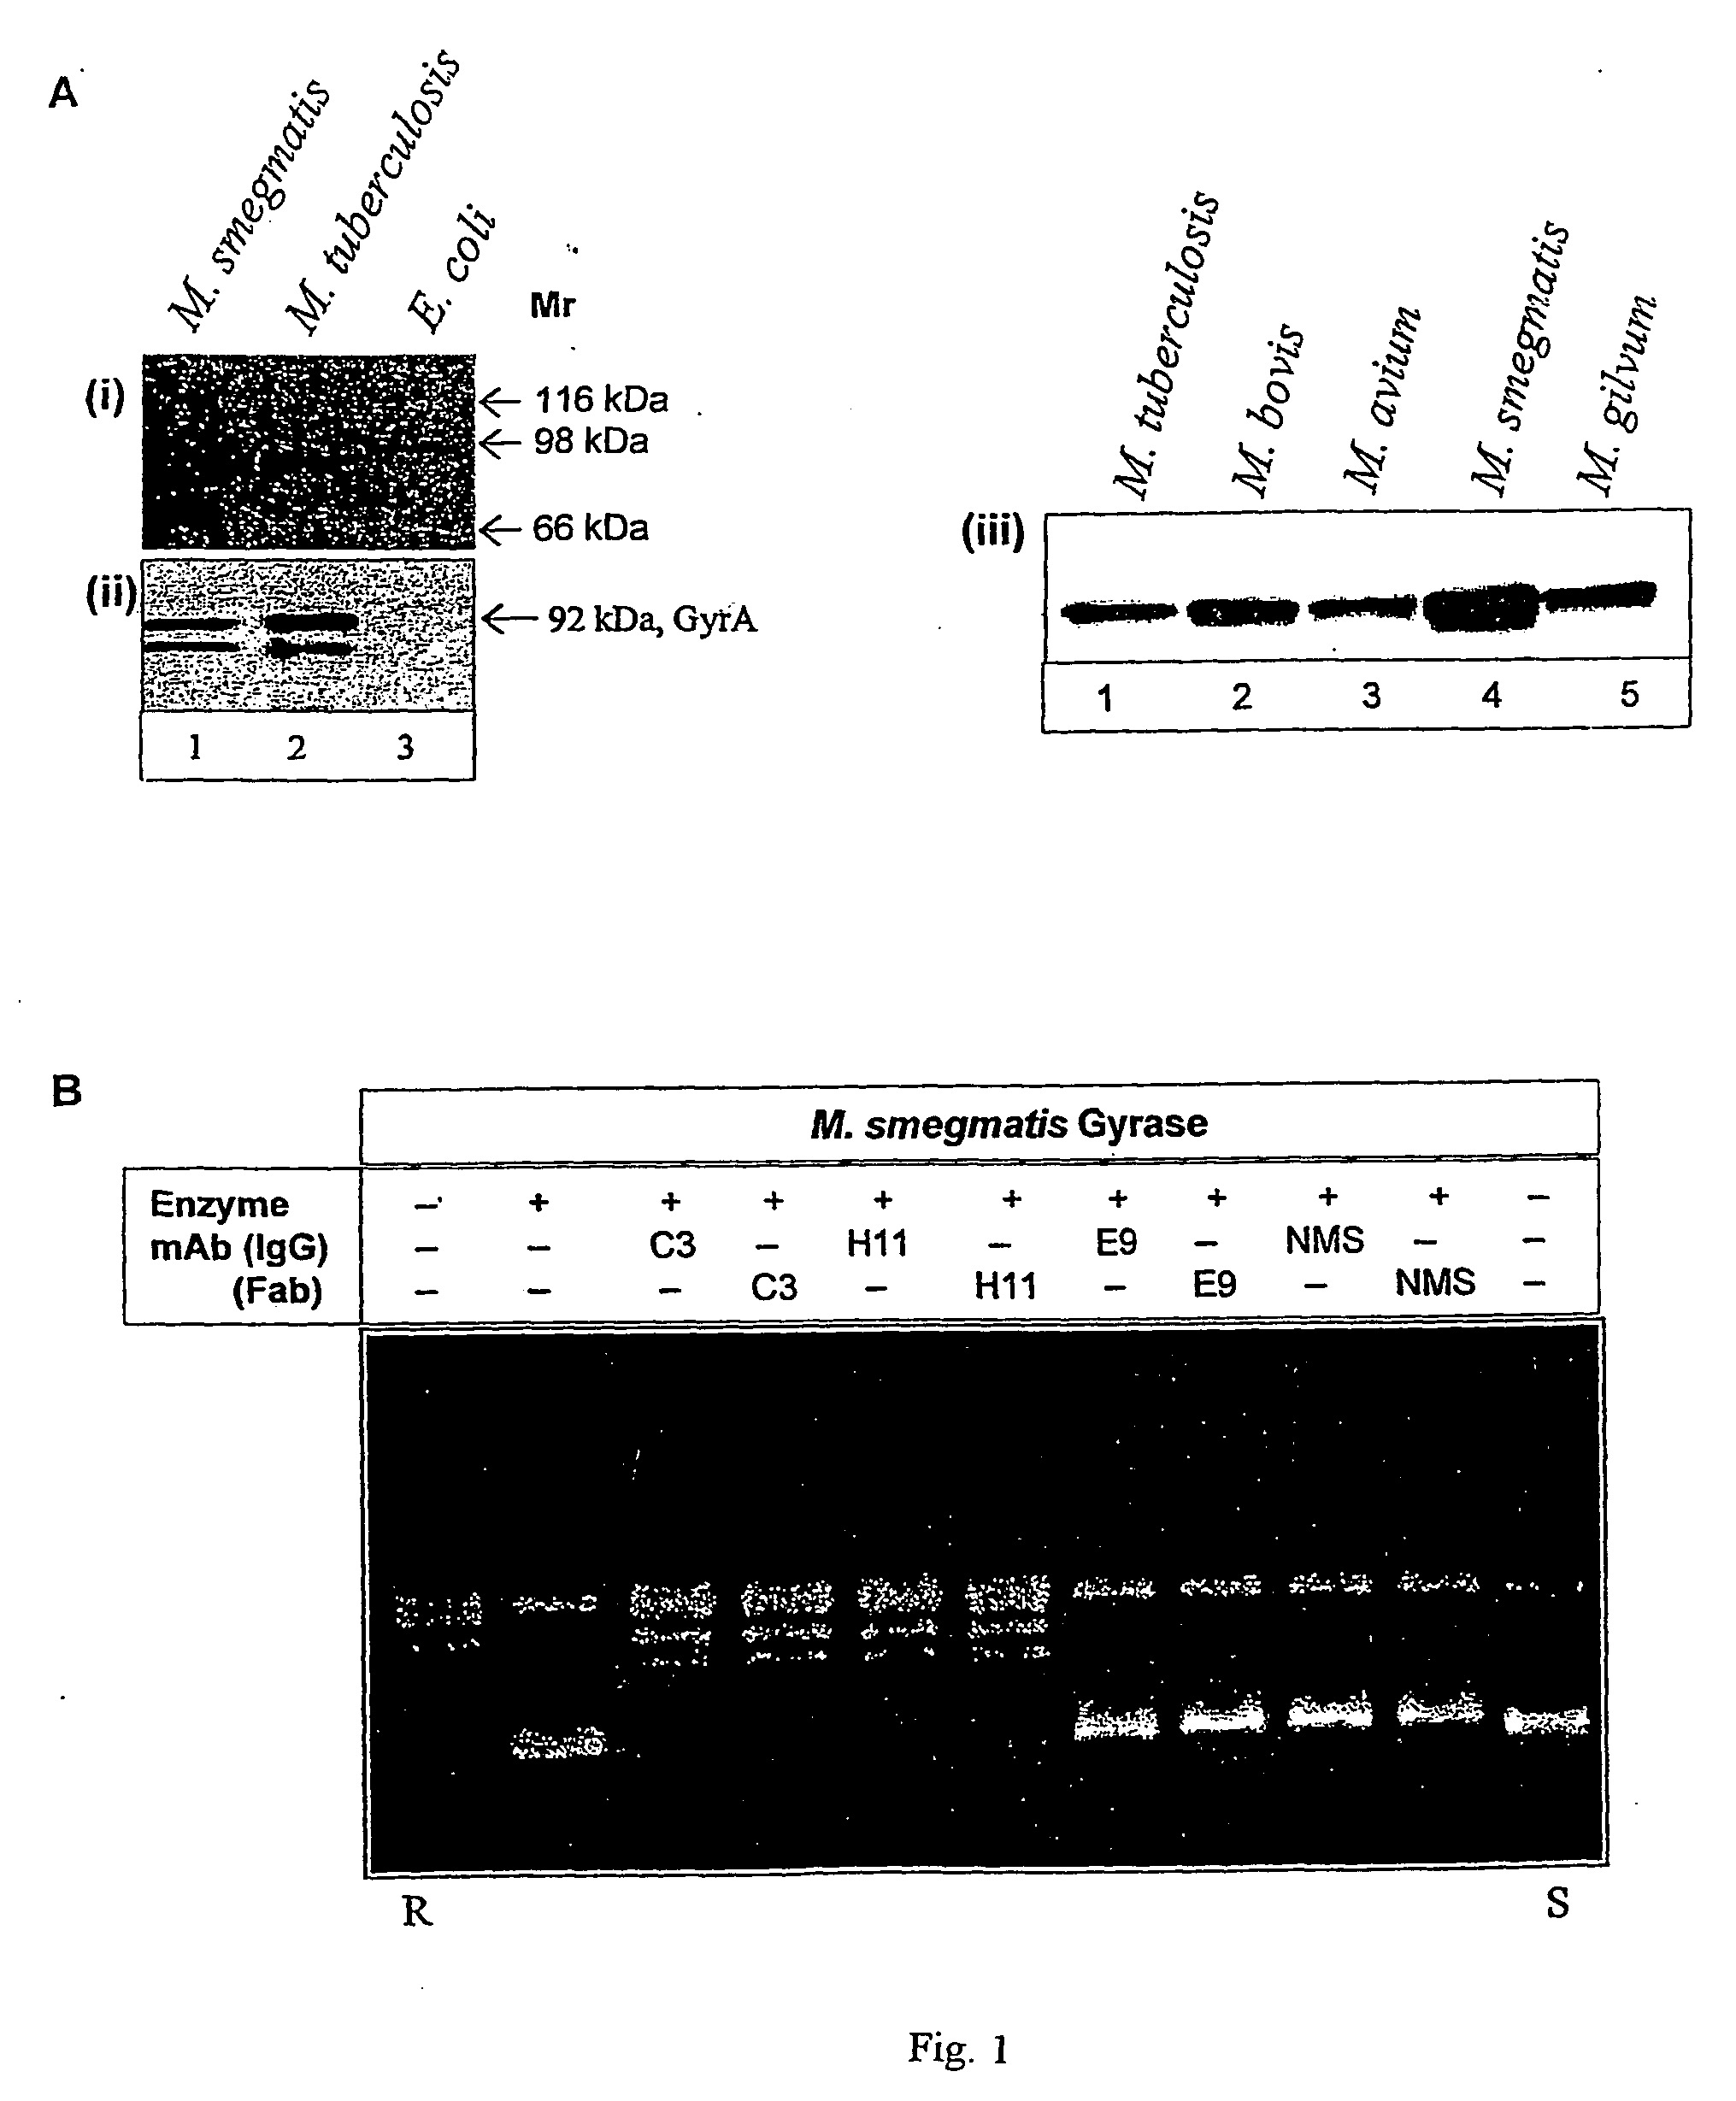 Monoclonal antibody derived peptide inhibitors for mycobacterial dna gyrase